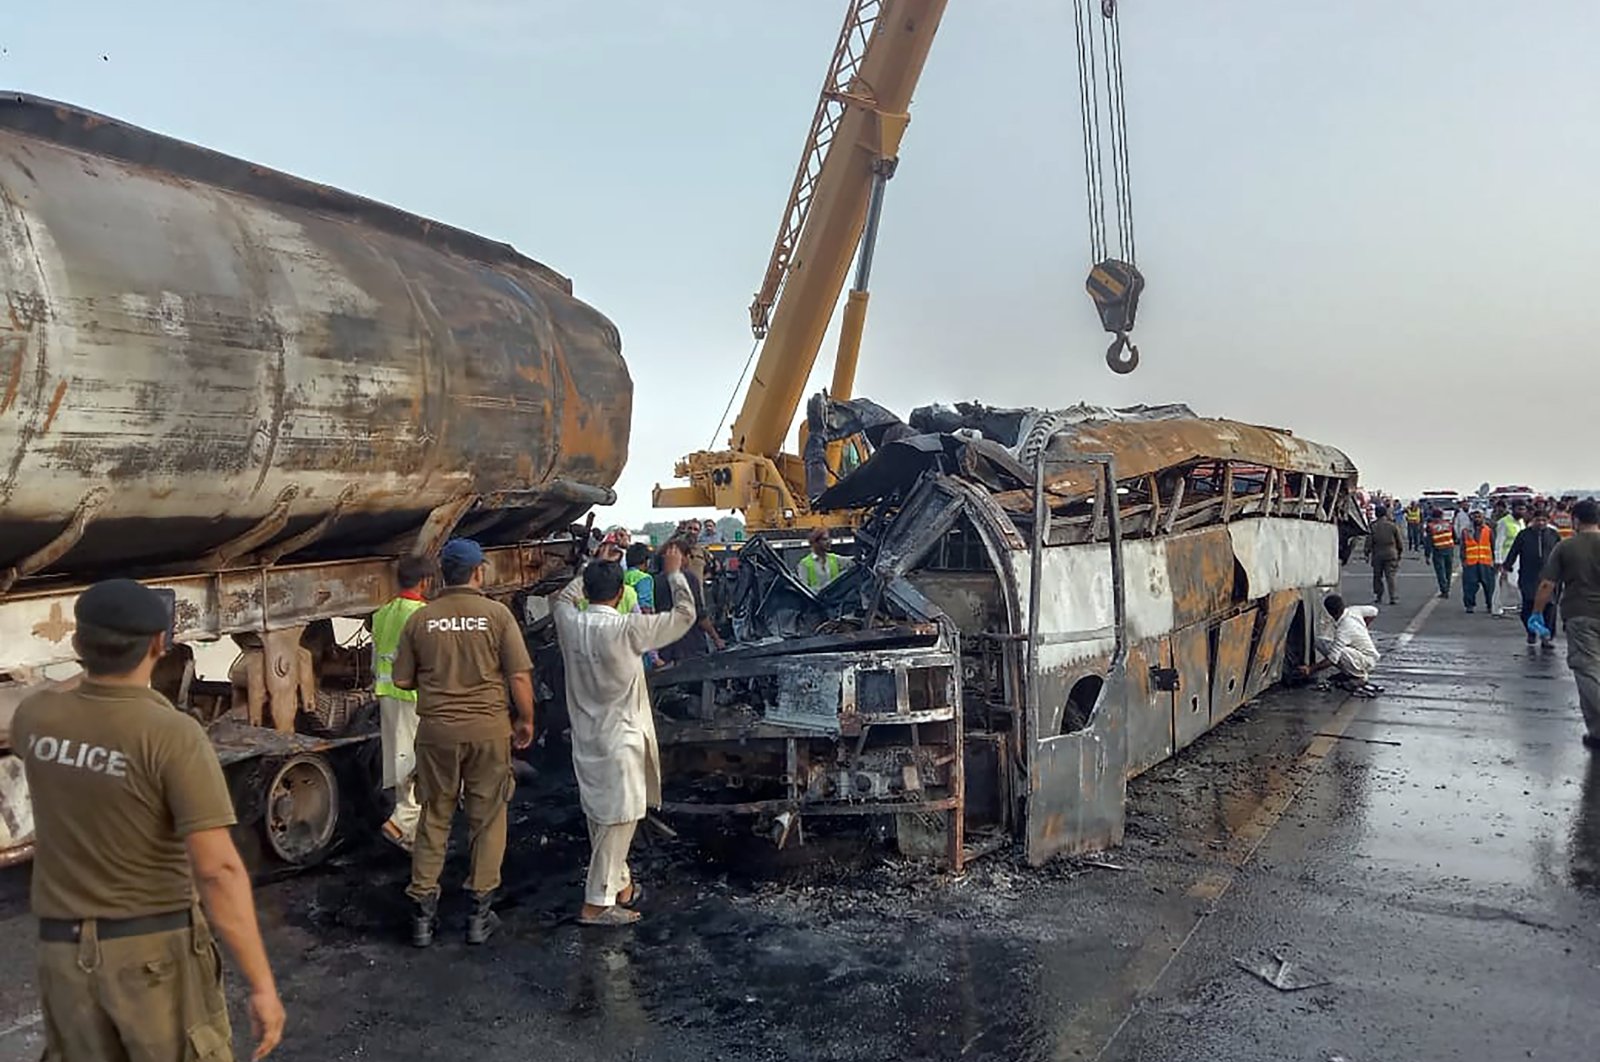 Police officers and workers remove the wreckage of a bus that collided with an oil tanker along a highway in Uch Sharif near Multan, Pakistan, Aug. 16, 2022. (AP Photo)